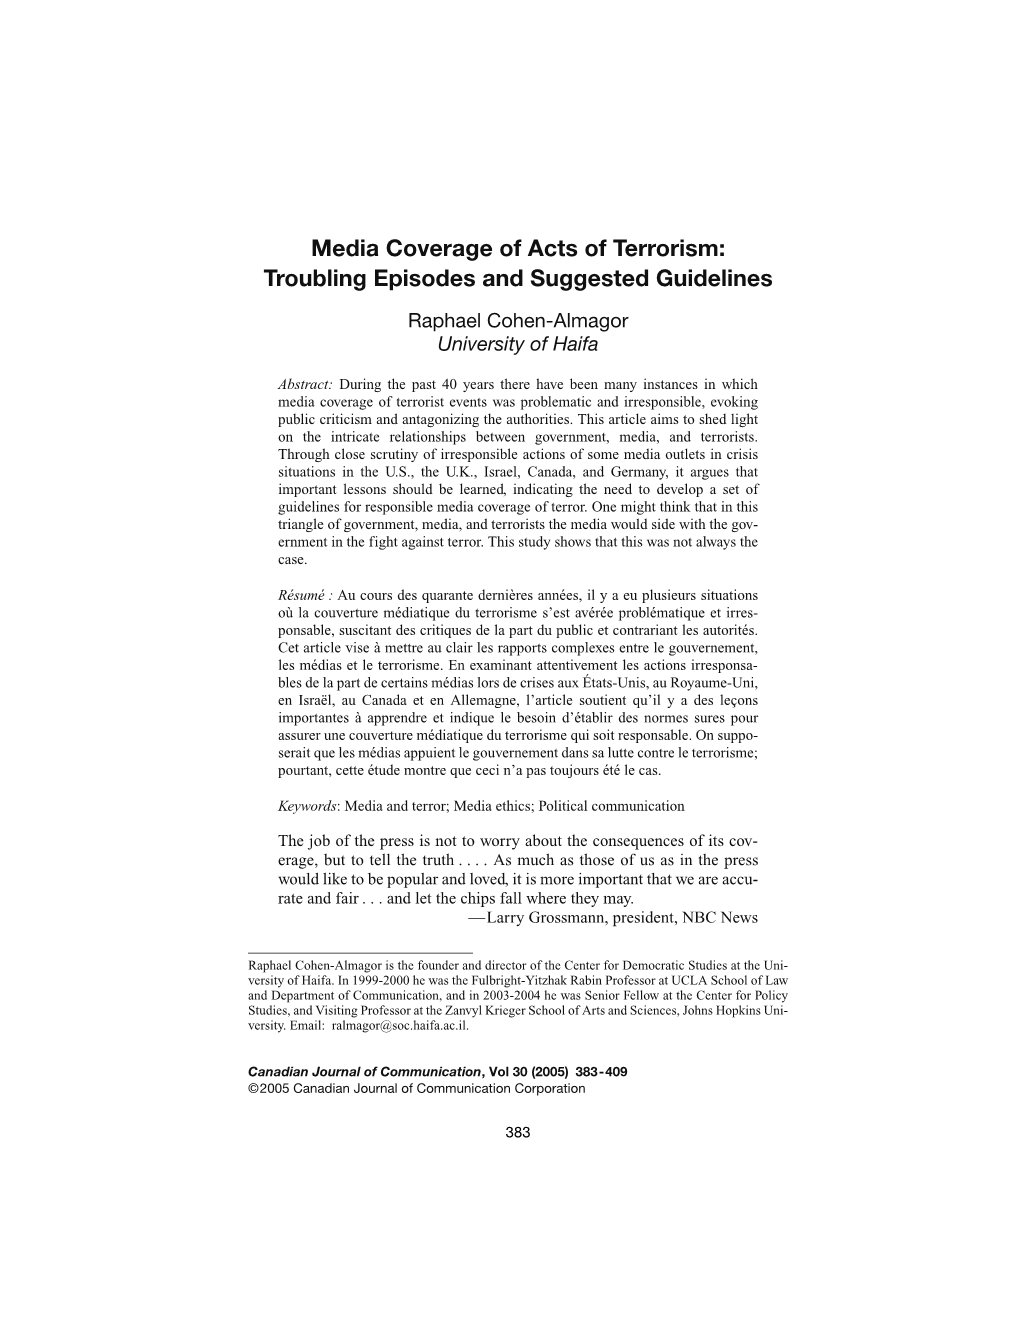 Media Coverage of Acts of Terrorism: Troubling Episodes and Suggested Guidelines